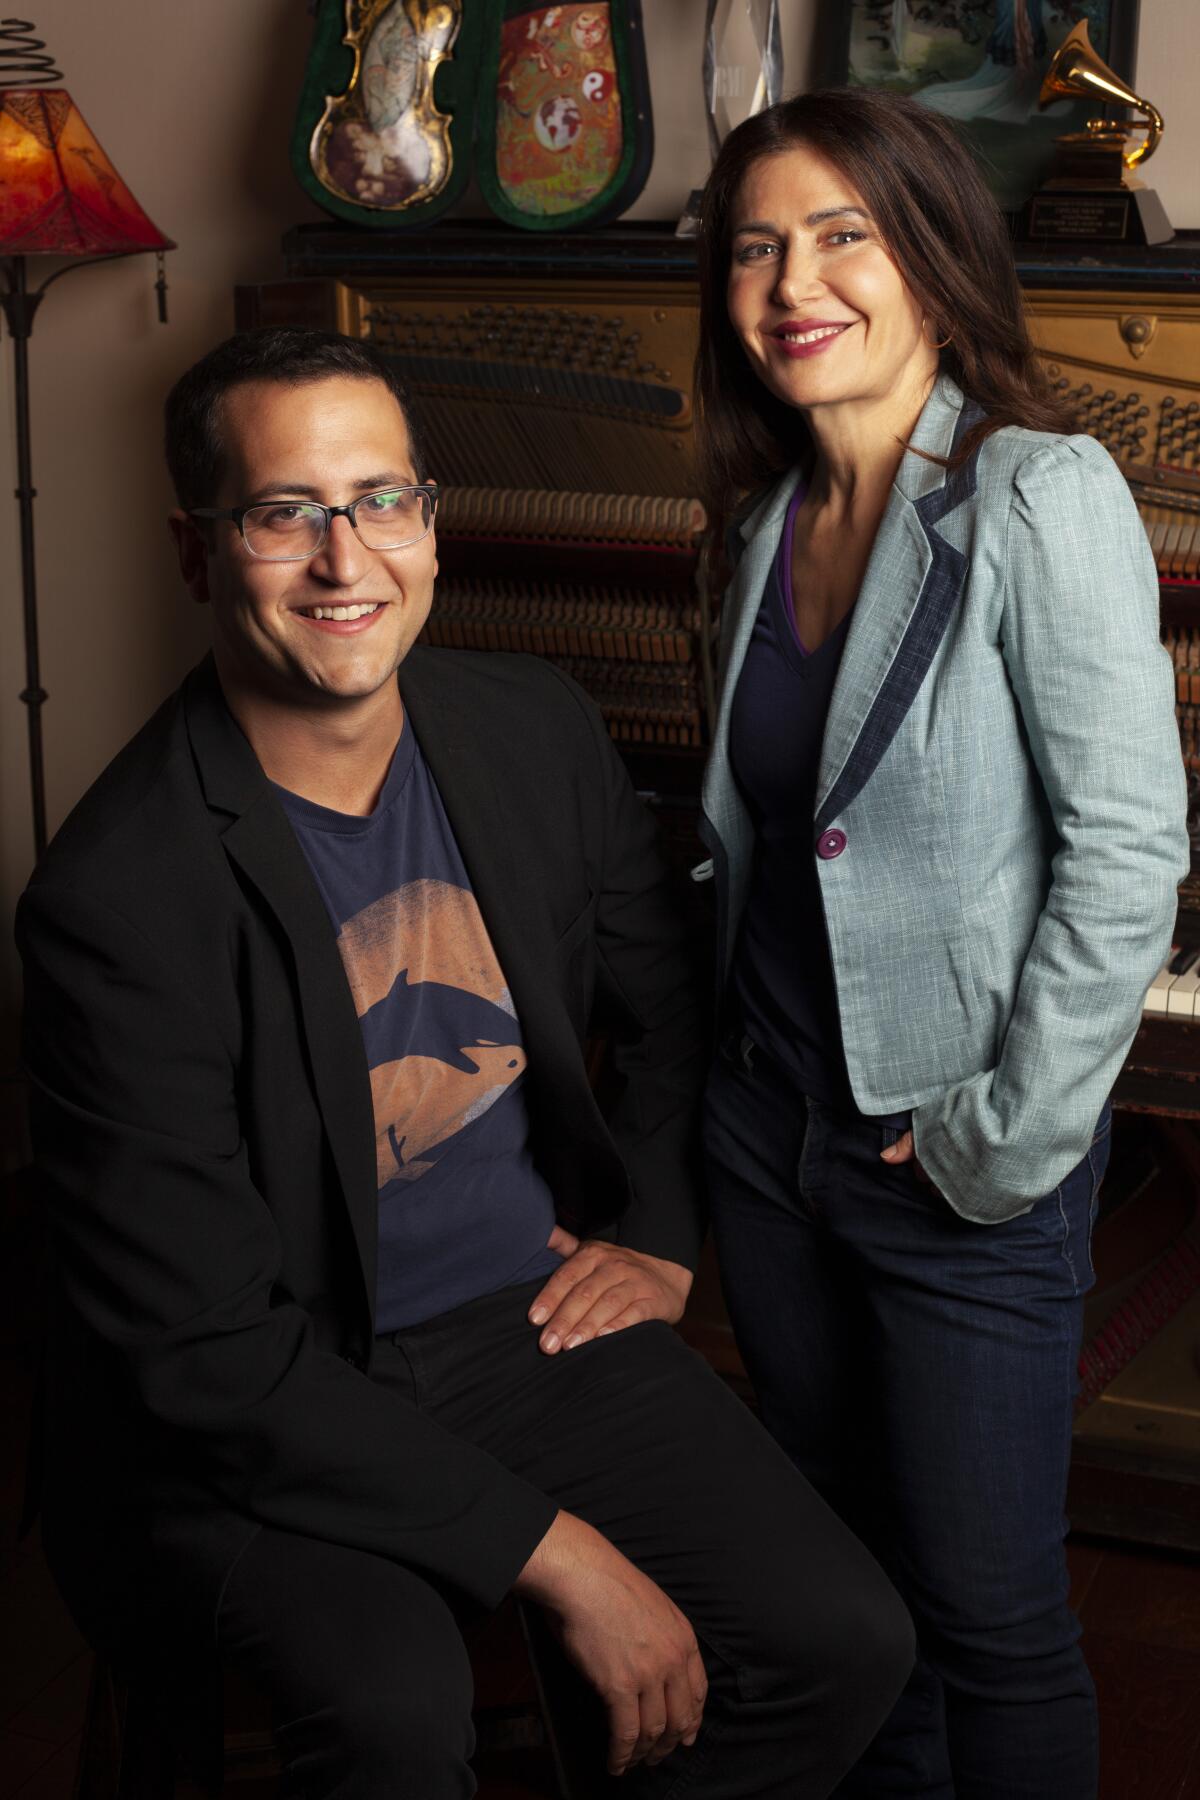 A smiling, bespectacled man in a black blazer and T-shirt sits near a dark-haired woman for a portrait.